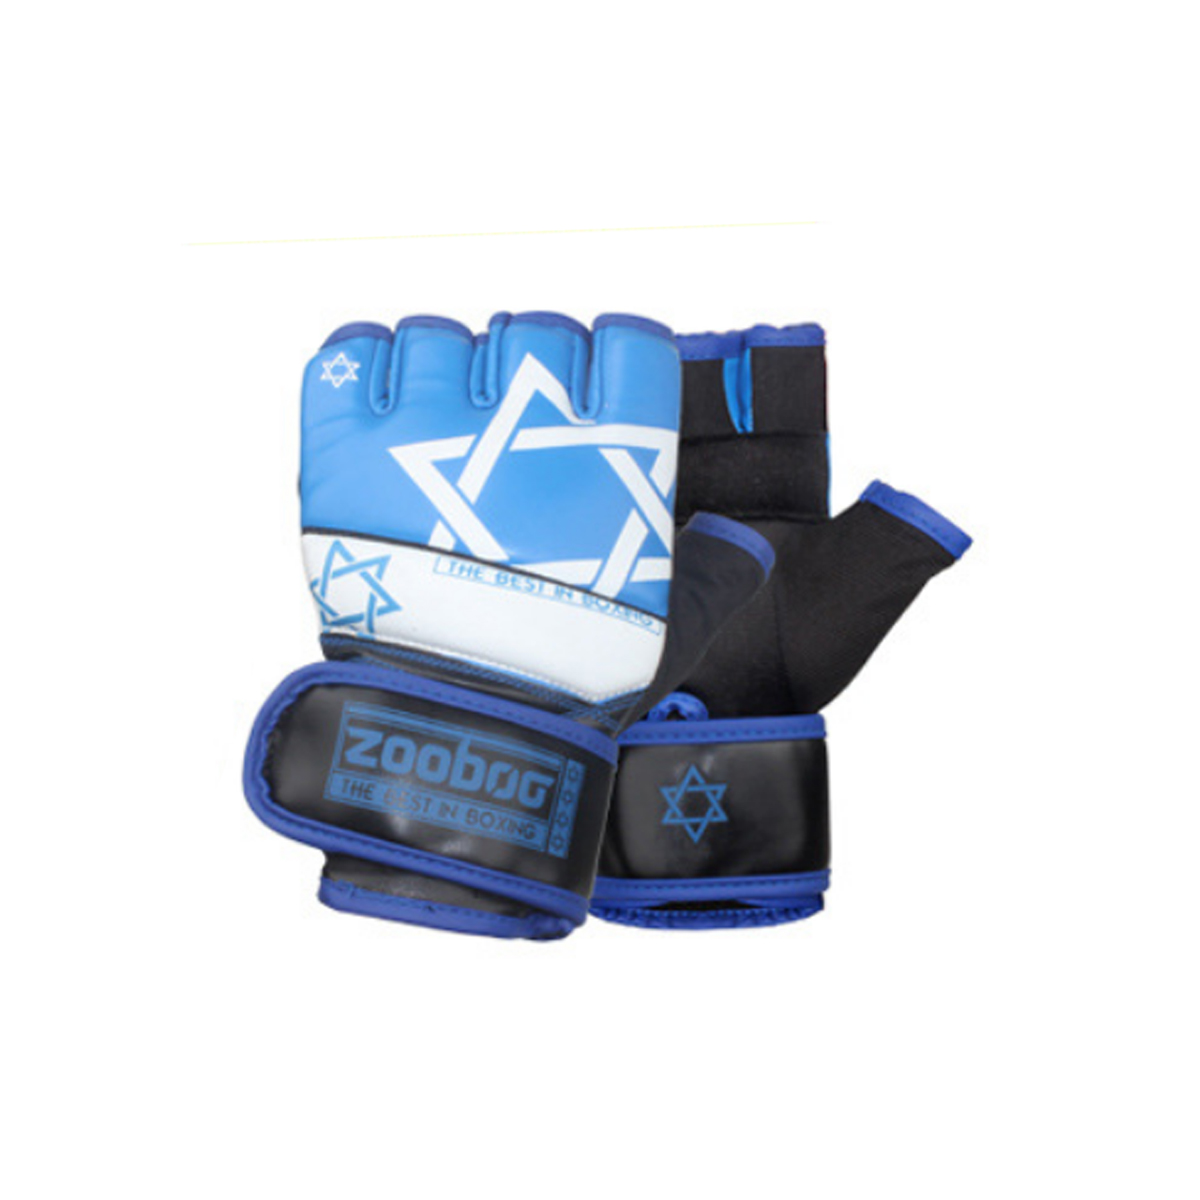 ZOOBOO-Boxing-Gloves-Training-Gloves-Sparring-Mitts-Slimming--Exercising-Boxing-Gloves-1637308-6